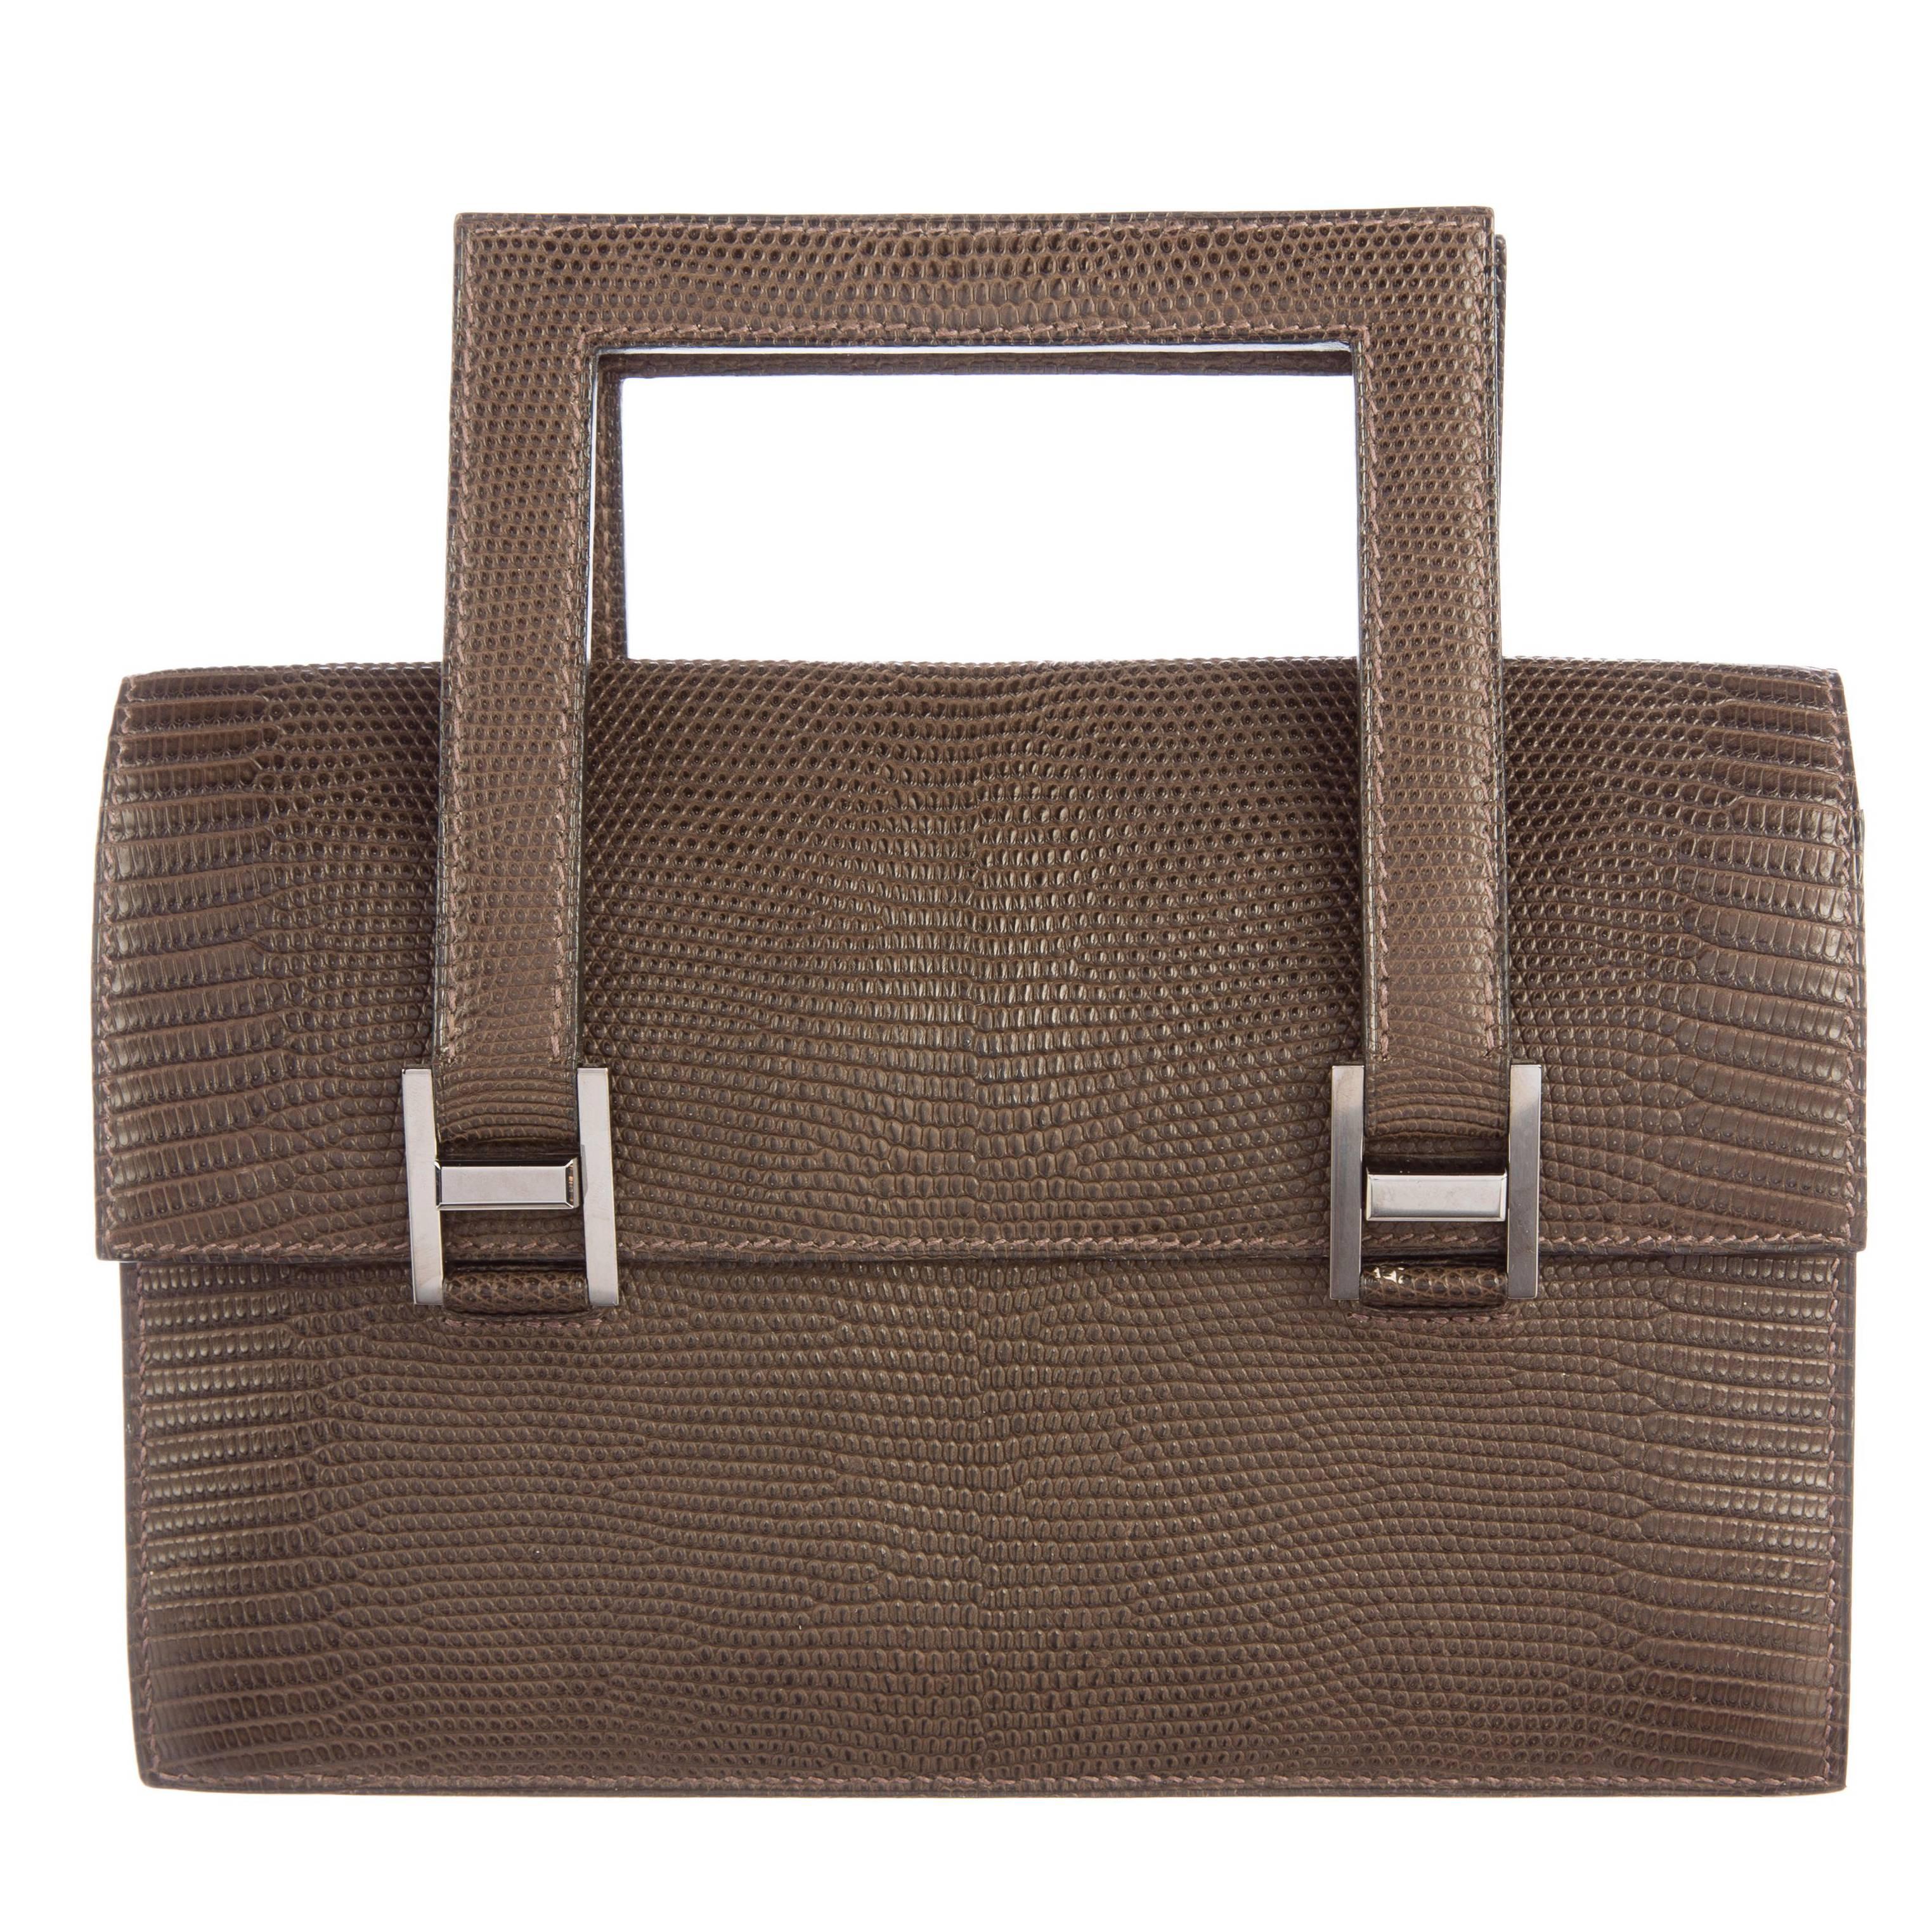 Hermes 'H' Buckle Taupe Reptile Leather Top Handle Satchel Evening Flap Bag